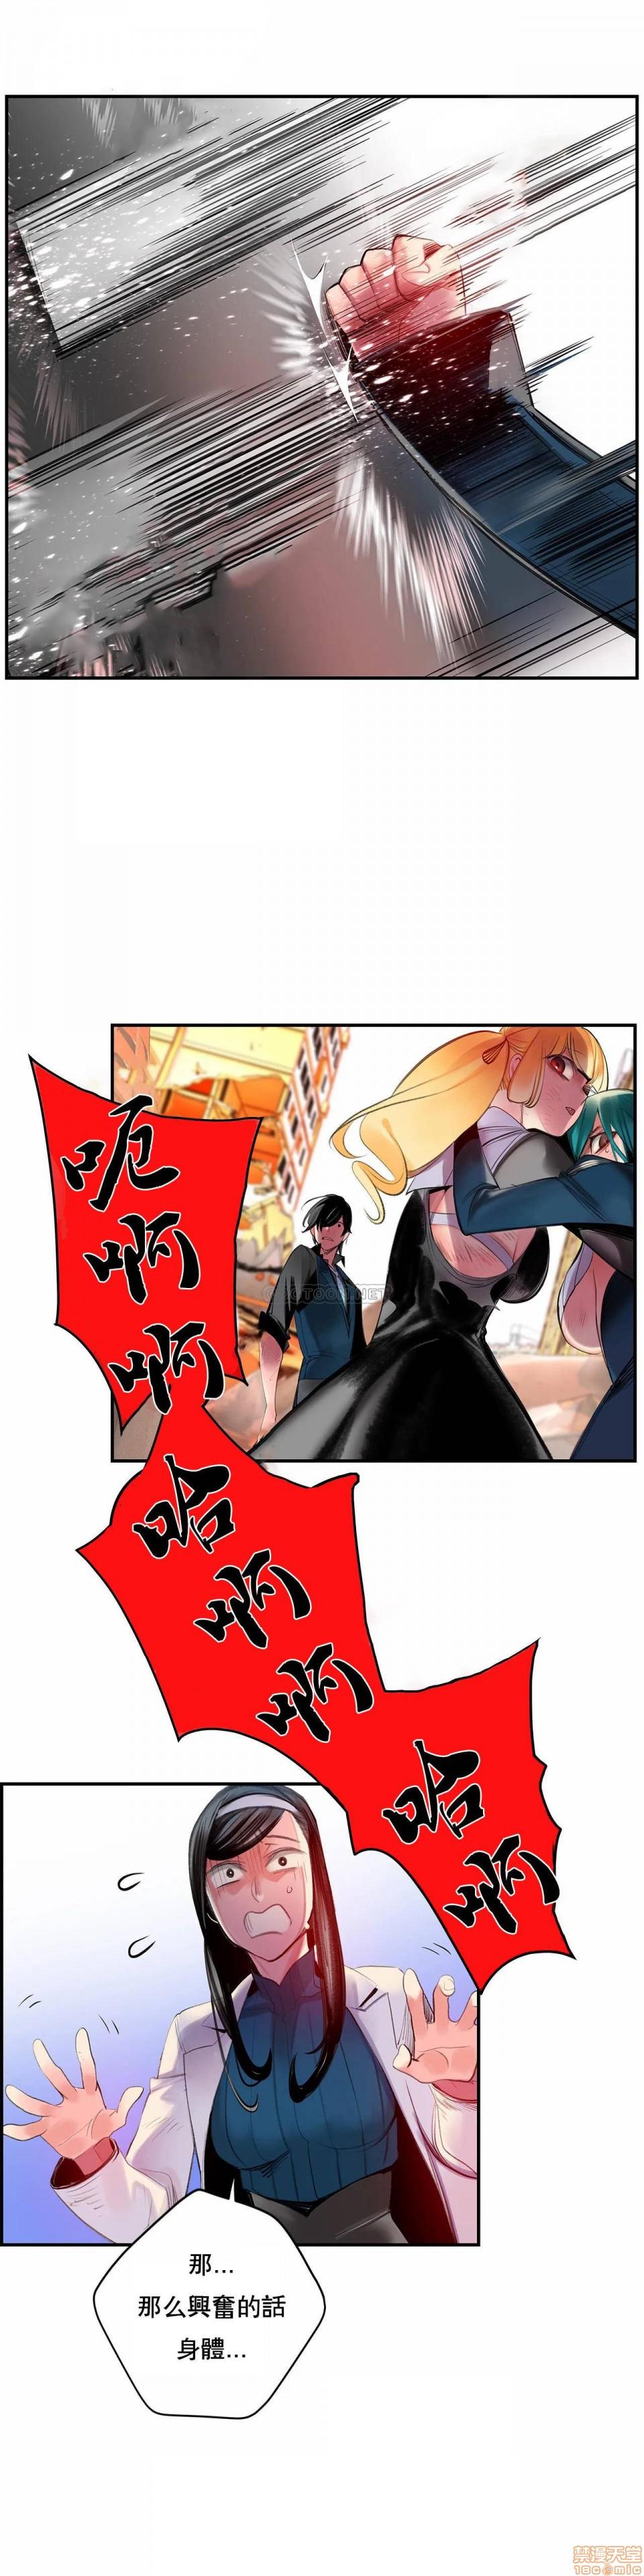 [Juder] Lilith`s Cord (第二季) Ch.77-93 end [Chinese] 142